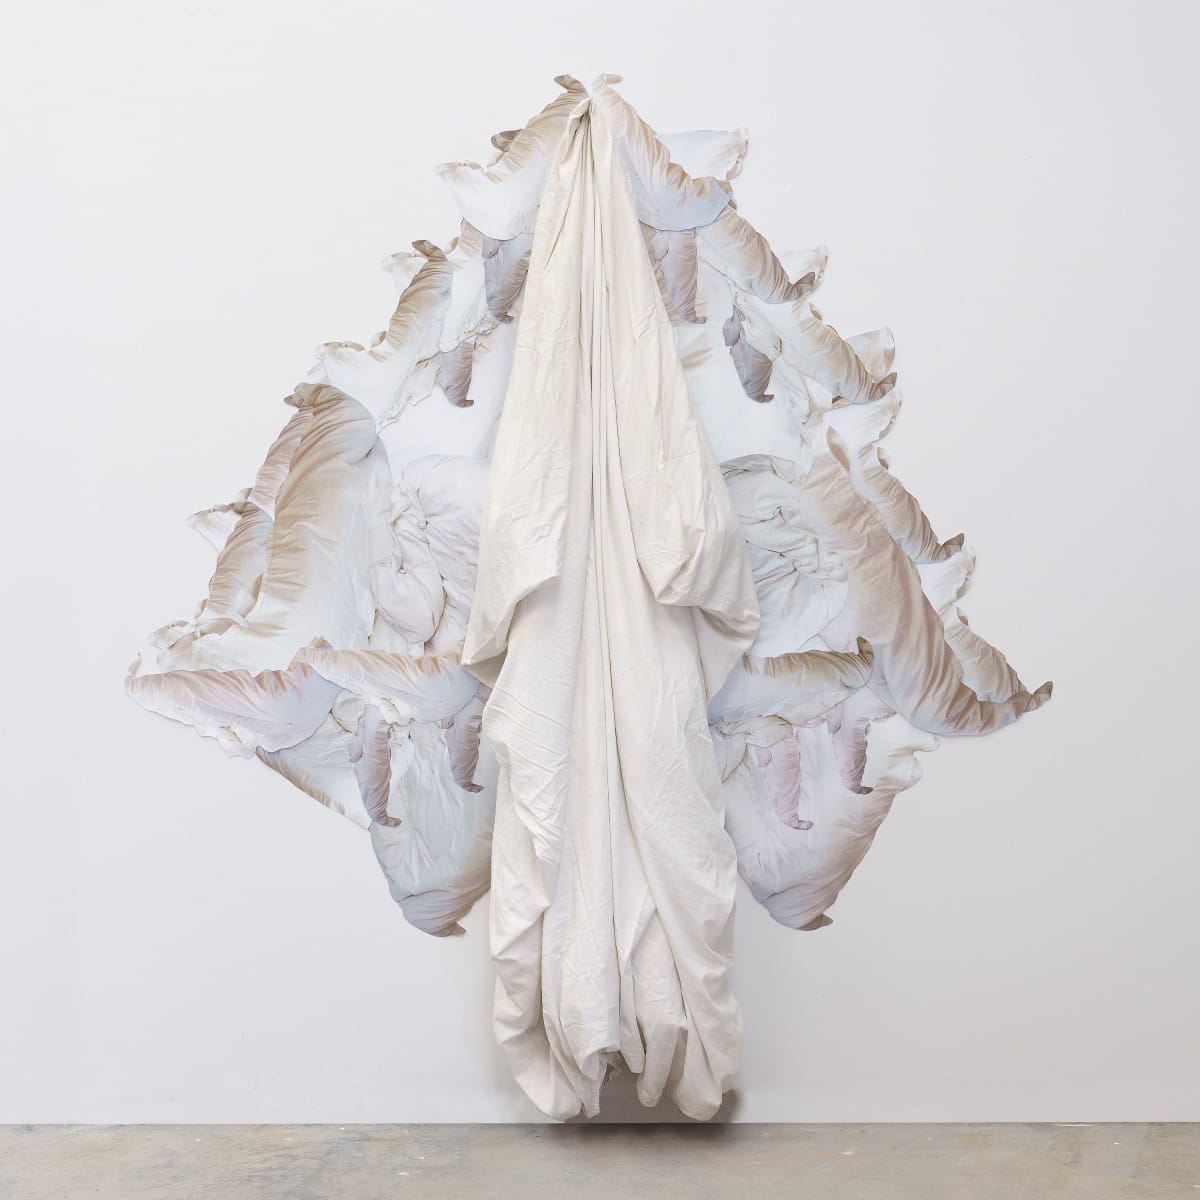 Sleeping Angel (Grieving Angel) by Mira Burack  Image: Sleeping Angel (Grieving Angel), 2020, Wall installation, goose down comforter, cotton duvet cover, photography collage (photographs of comforter), 84” x 84” x 7”